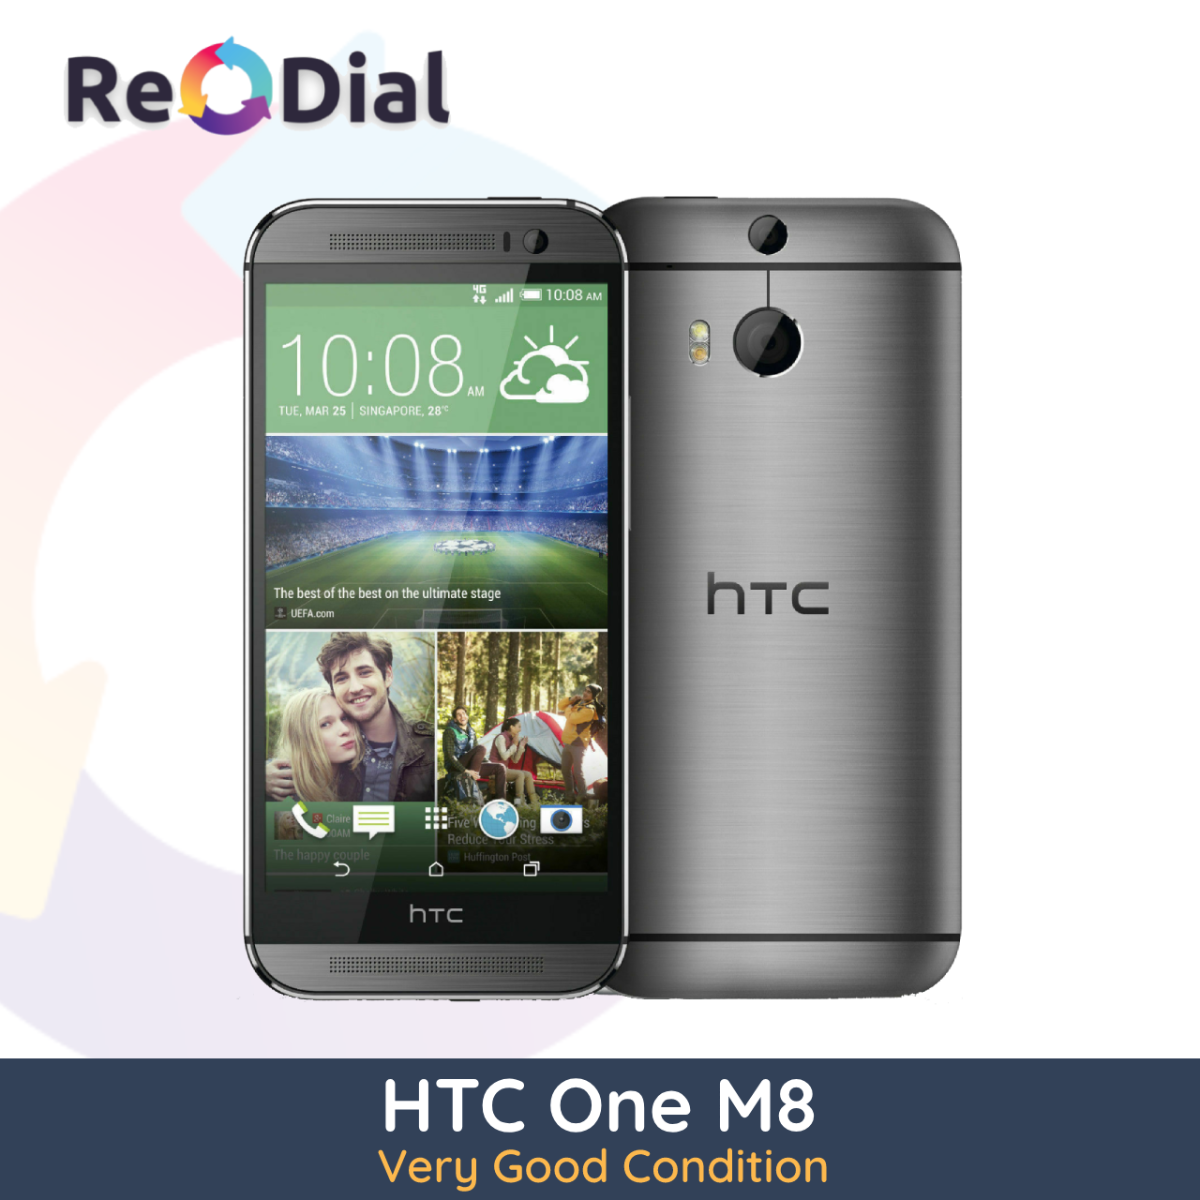 HTC One M8 - Very Good Condition